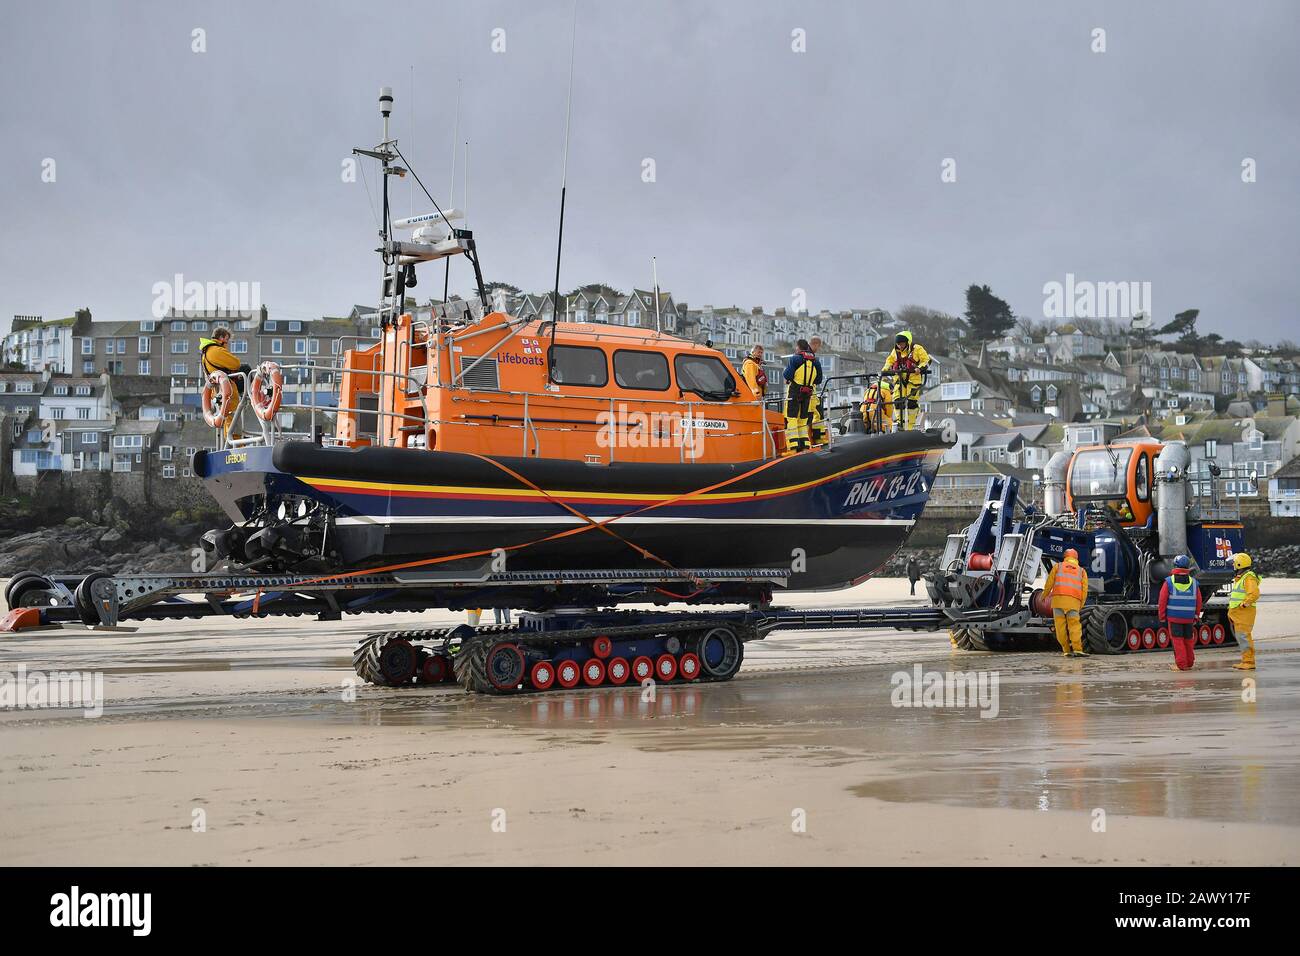 An RNLI boat is brought ashore at St Ives, The Met Office have said that 'a spell of very strong winds,' with gusts of 60-70mph, is expected across southern England on Monday, bringing likely delays to road, rail, air and ferry transport. Stock Photo